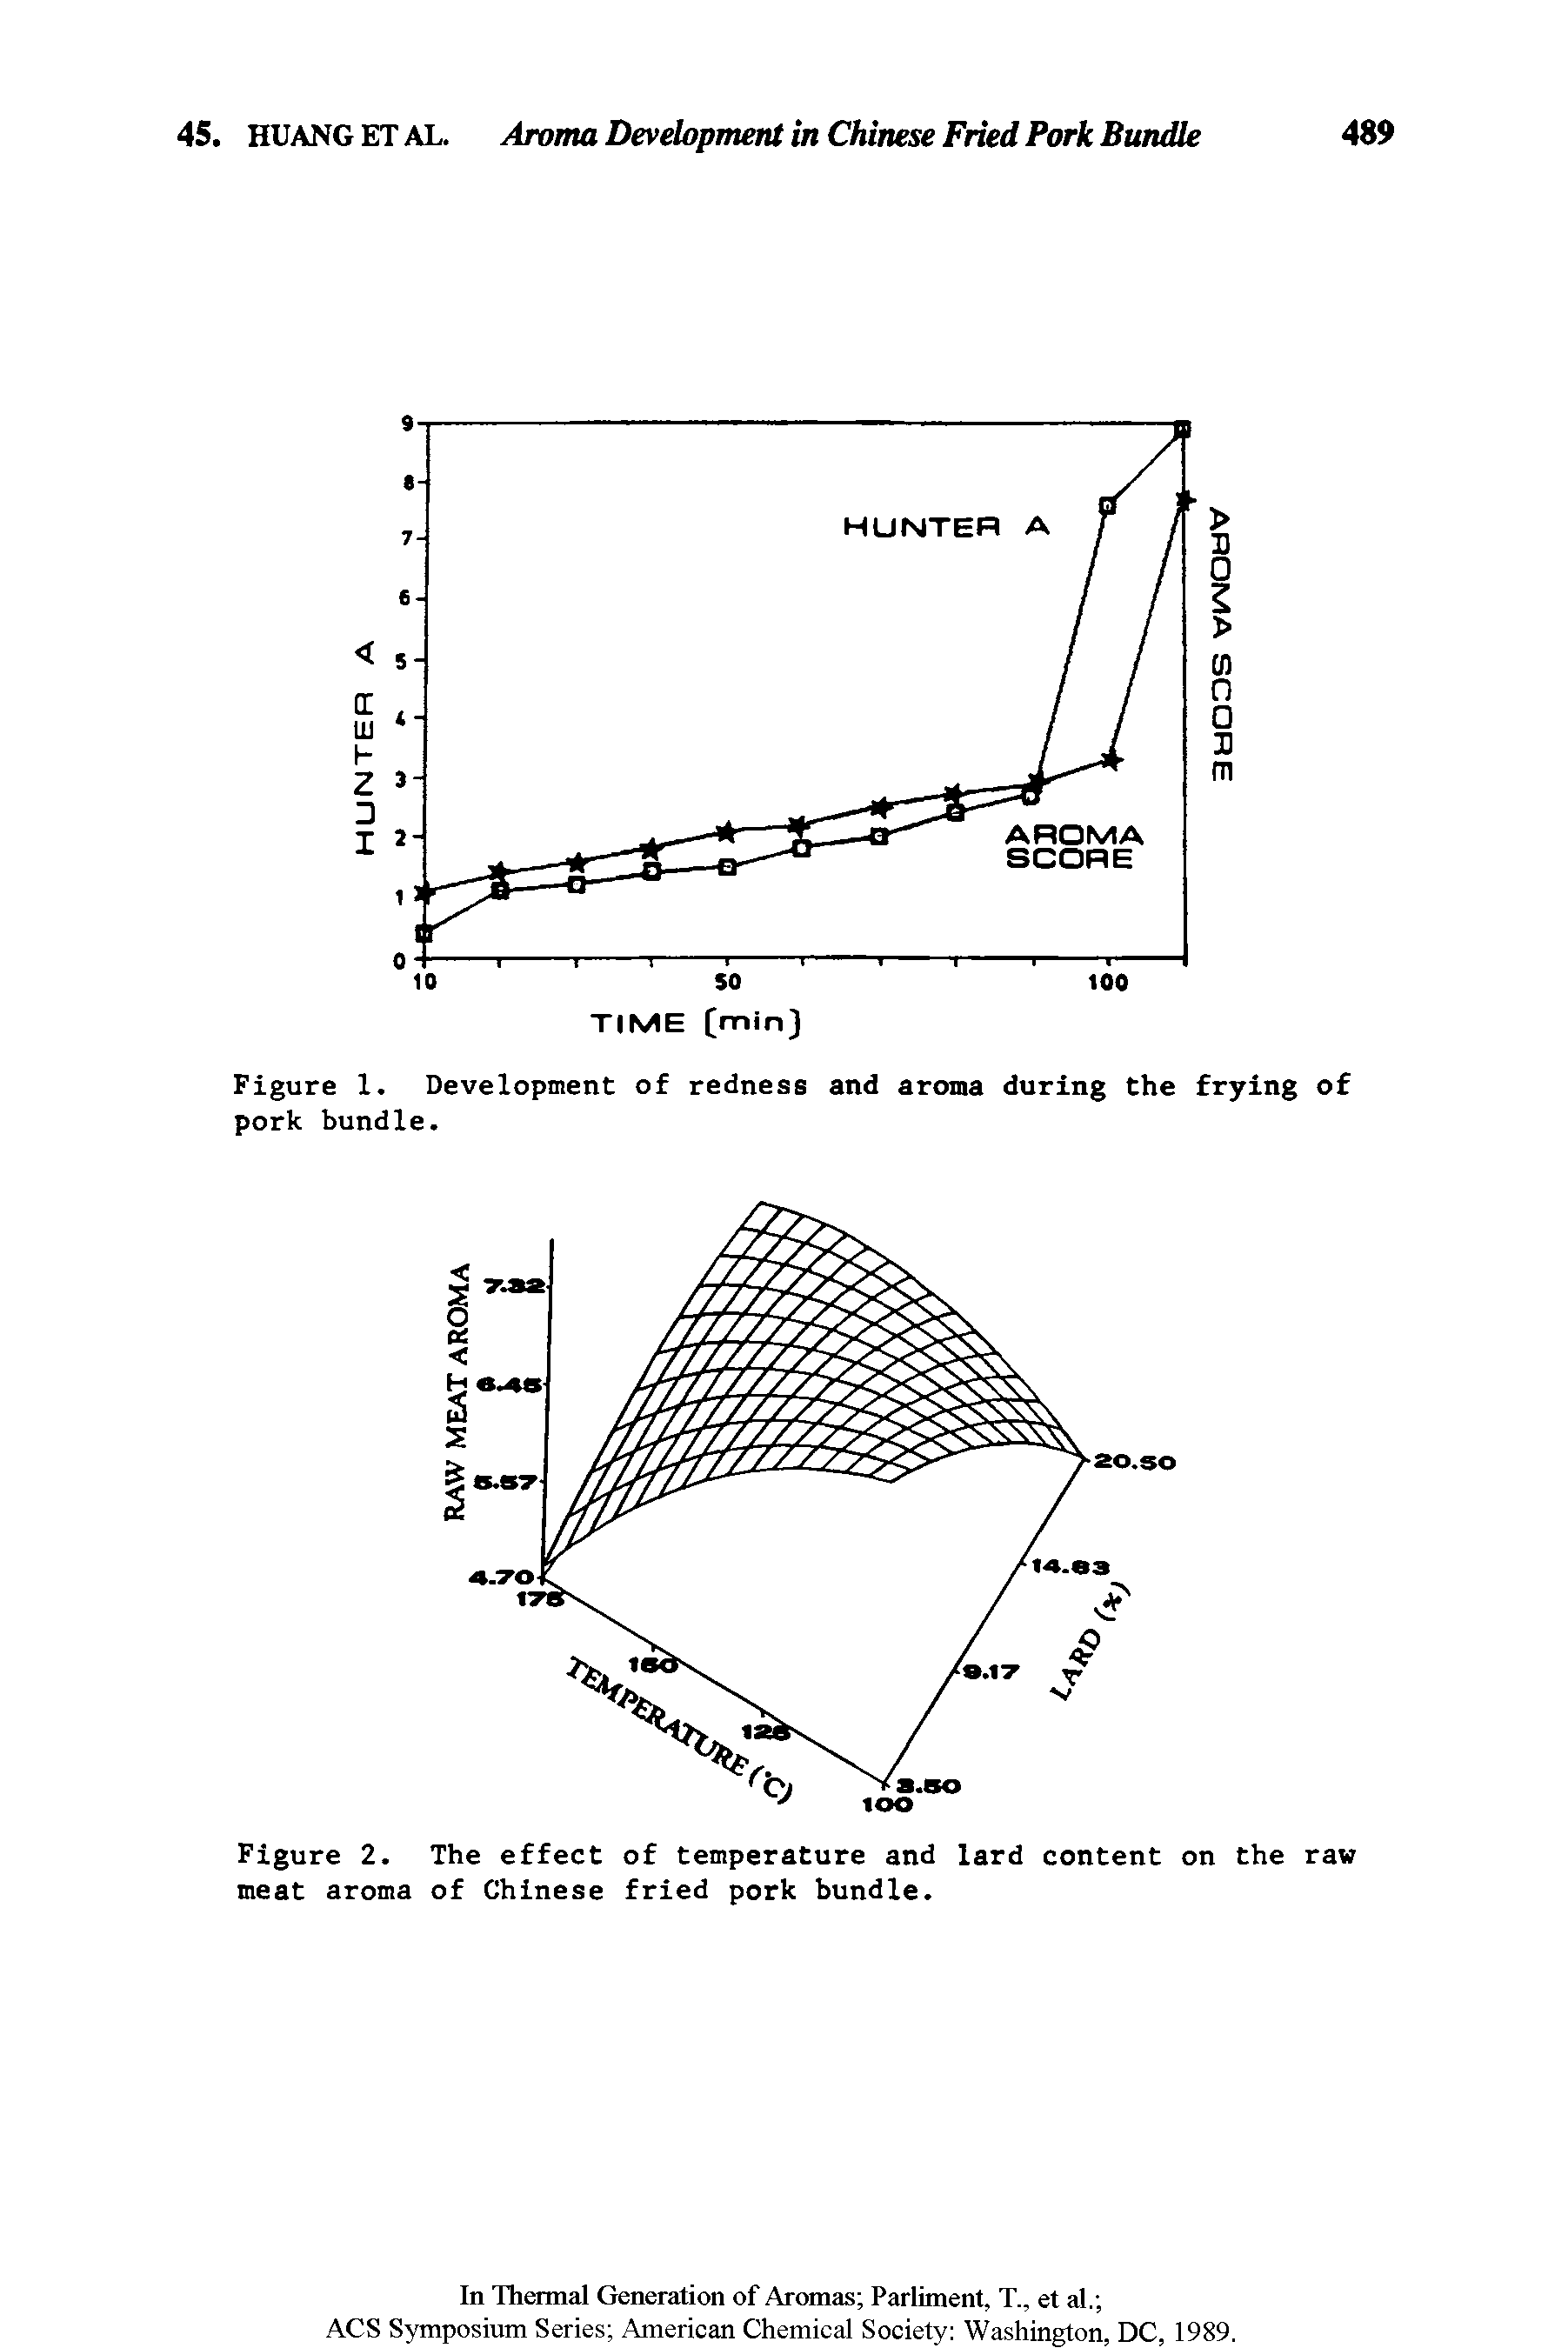 Figure 2. The effect of temperature and lard content on the raw meat aroma of Chinese fried pork bundle.